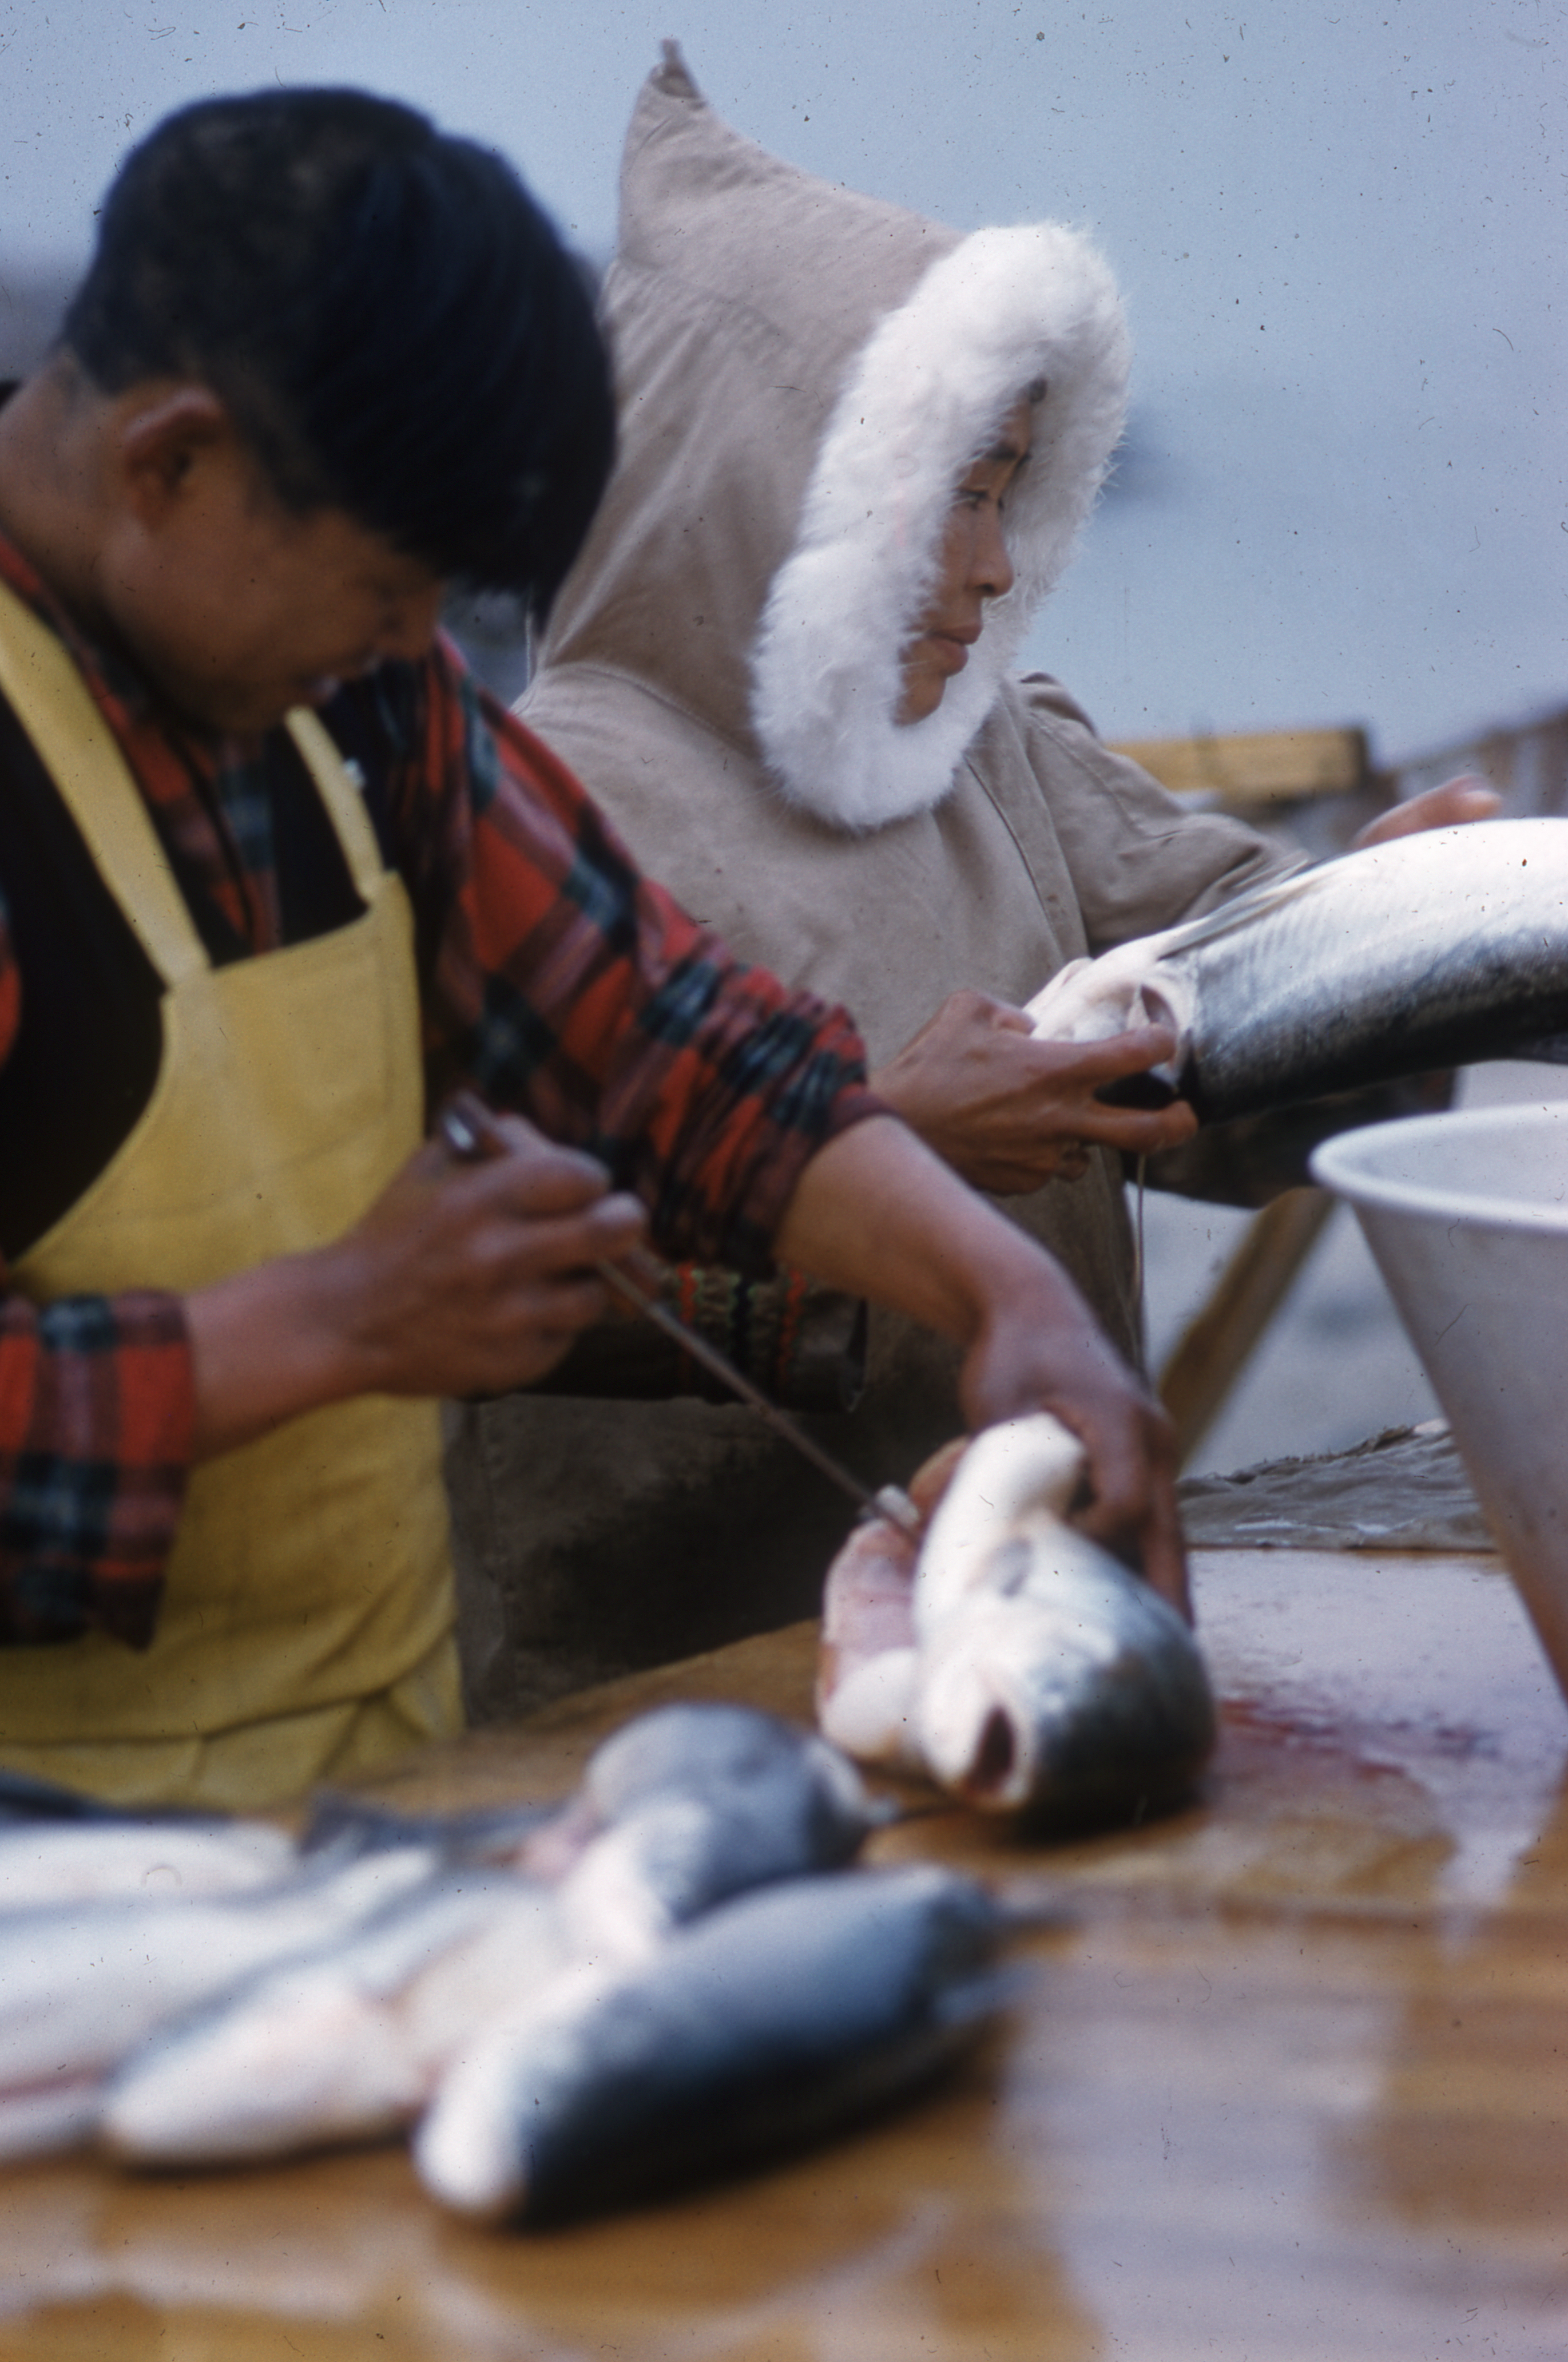 Cleaning arctic char in George River, Quebec, 1960